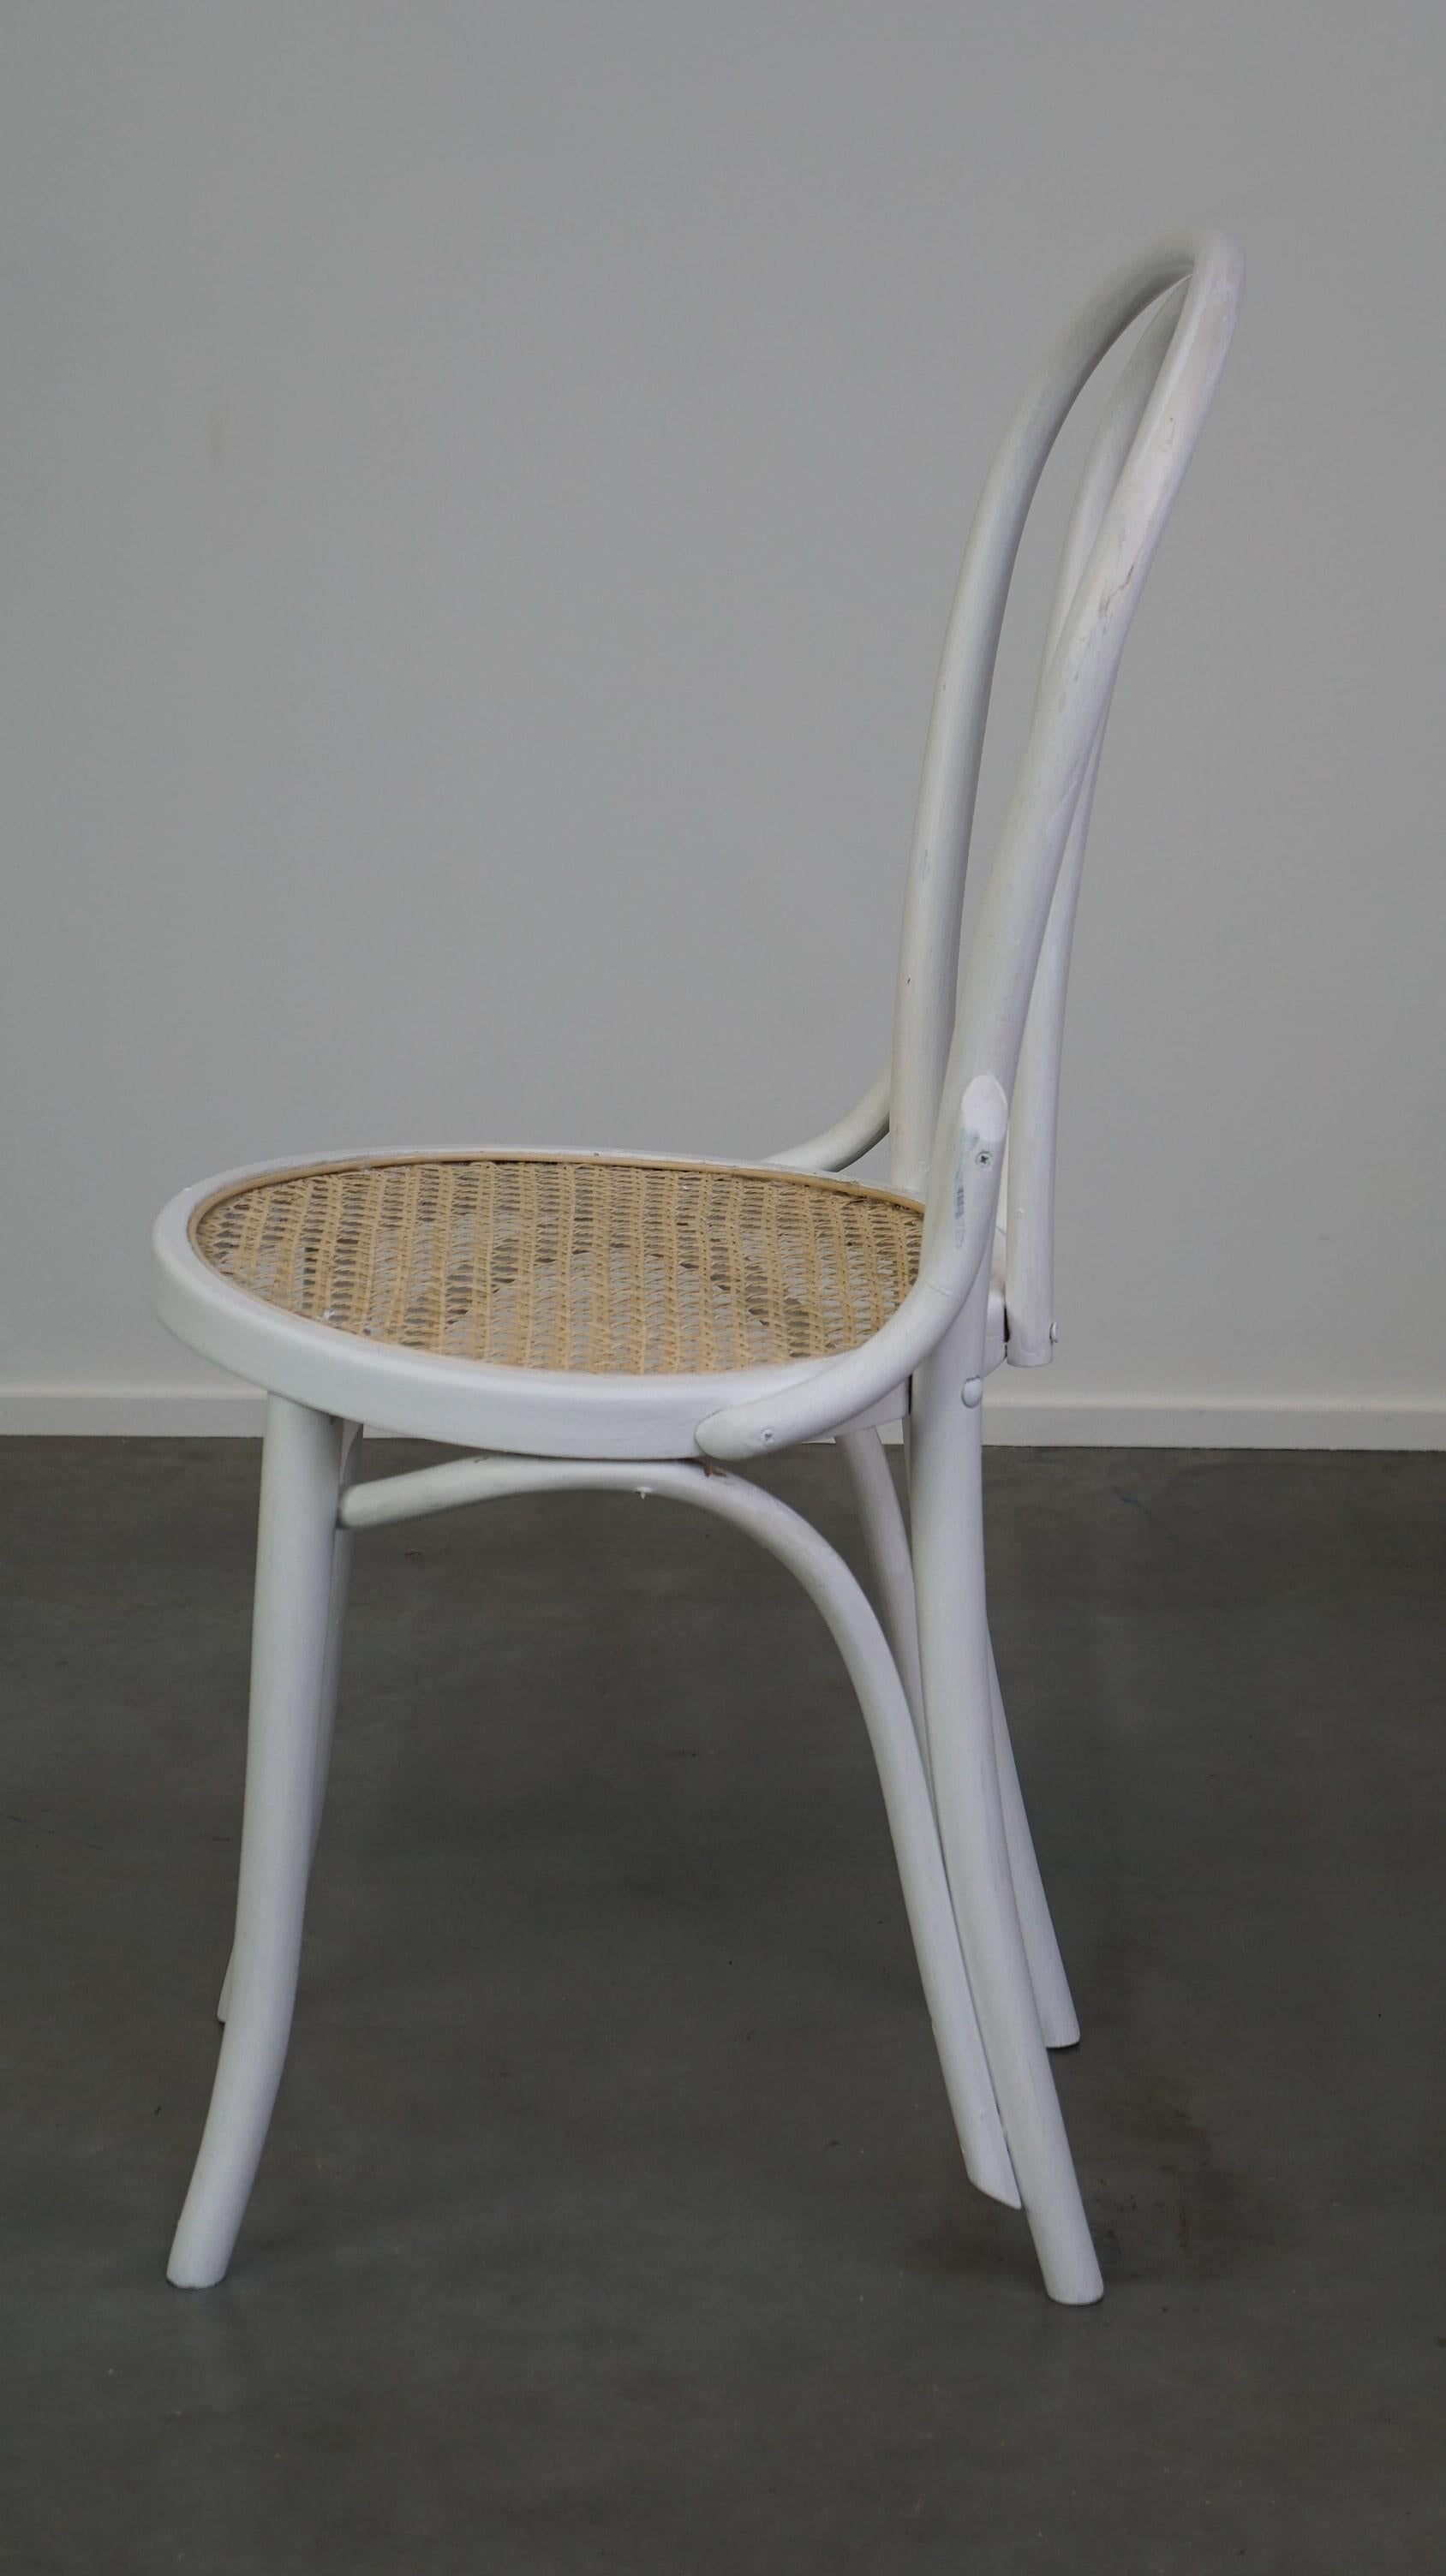 Wicker White painted original antique Thonet chair model no. 18 For Sale